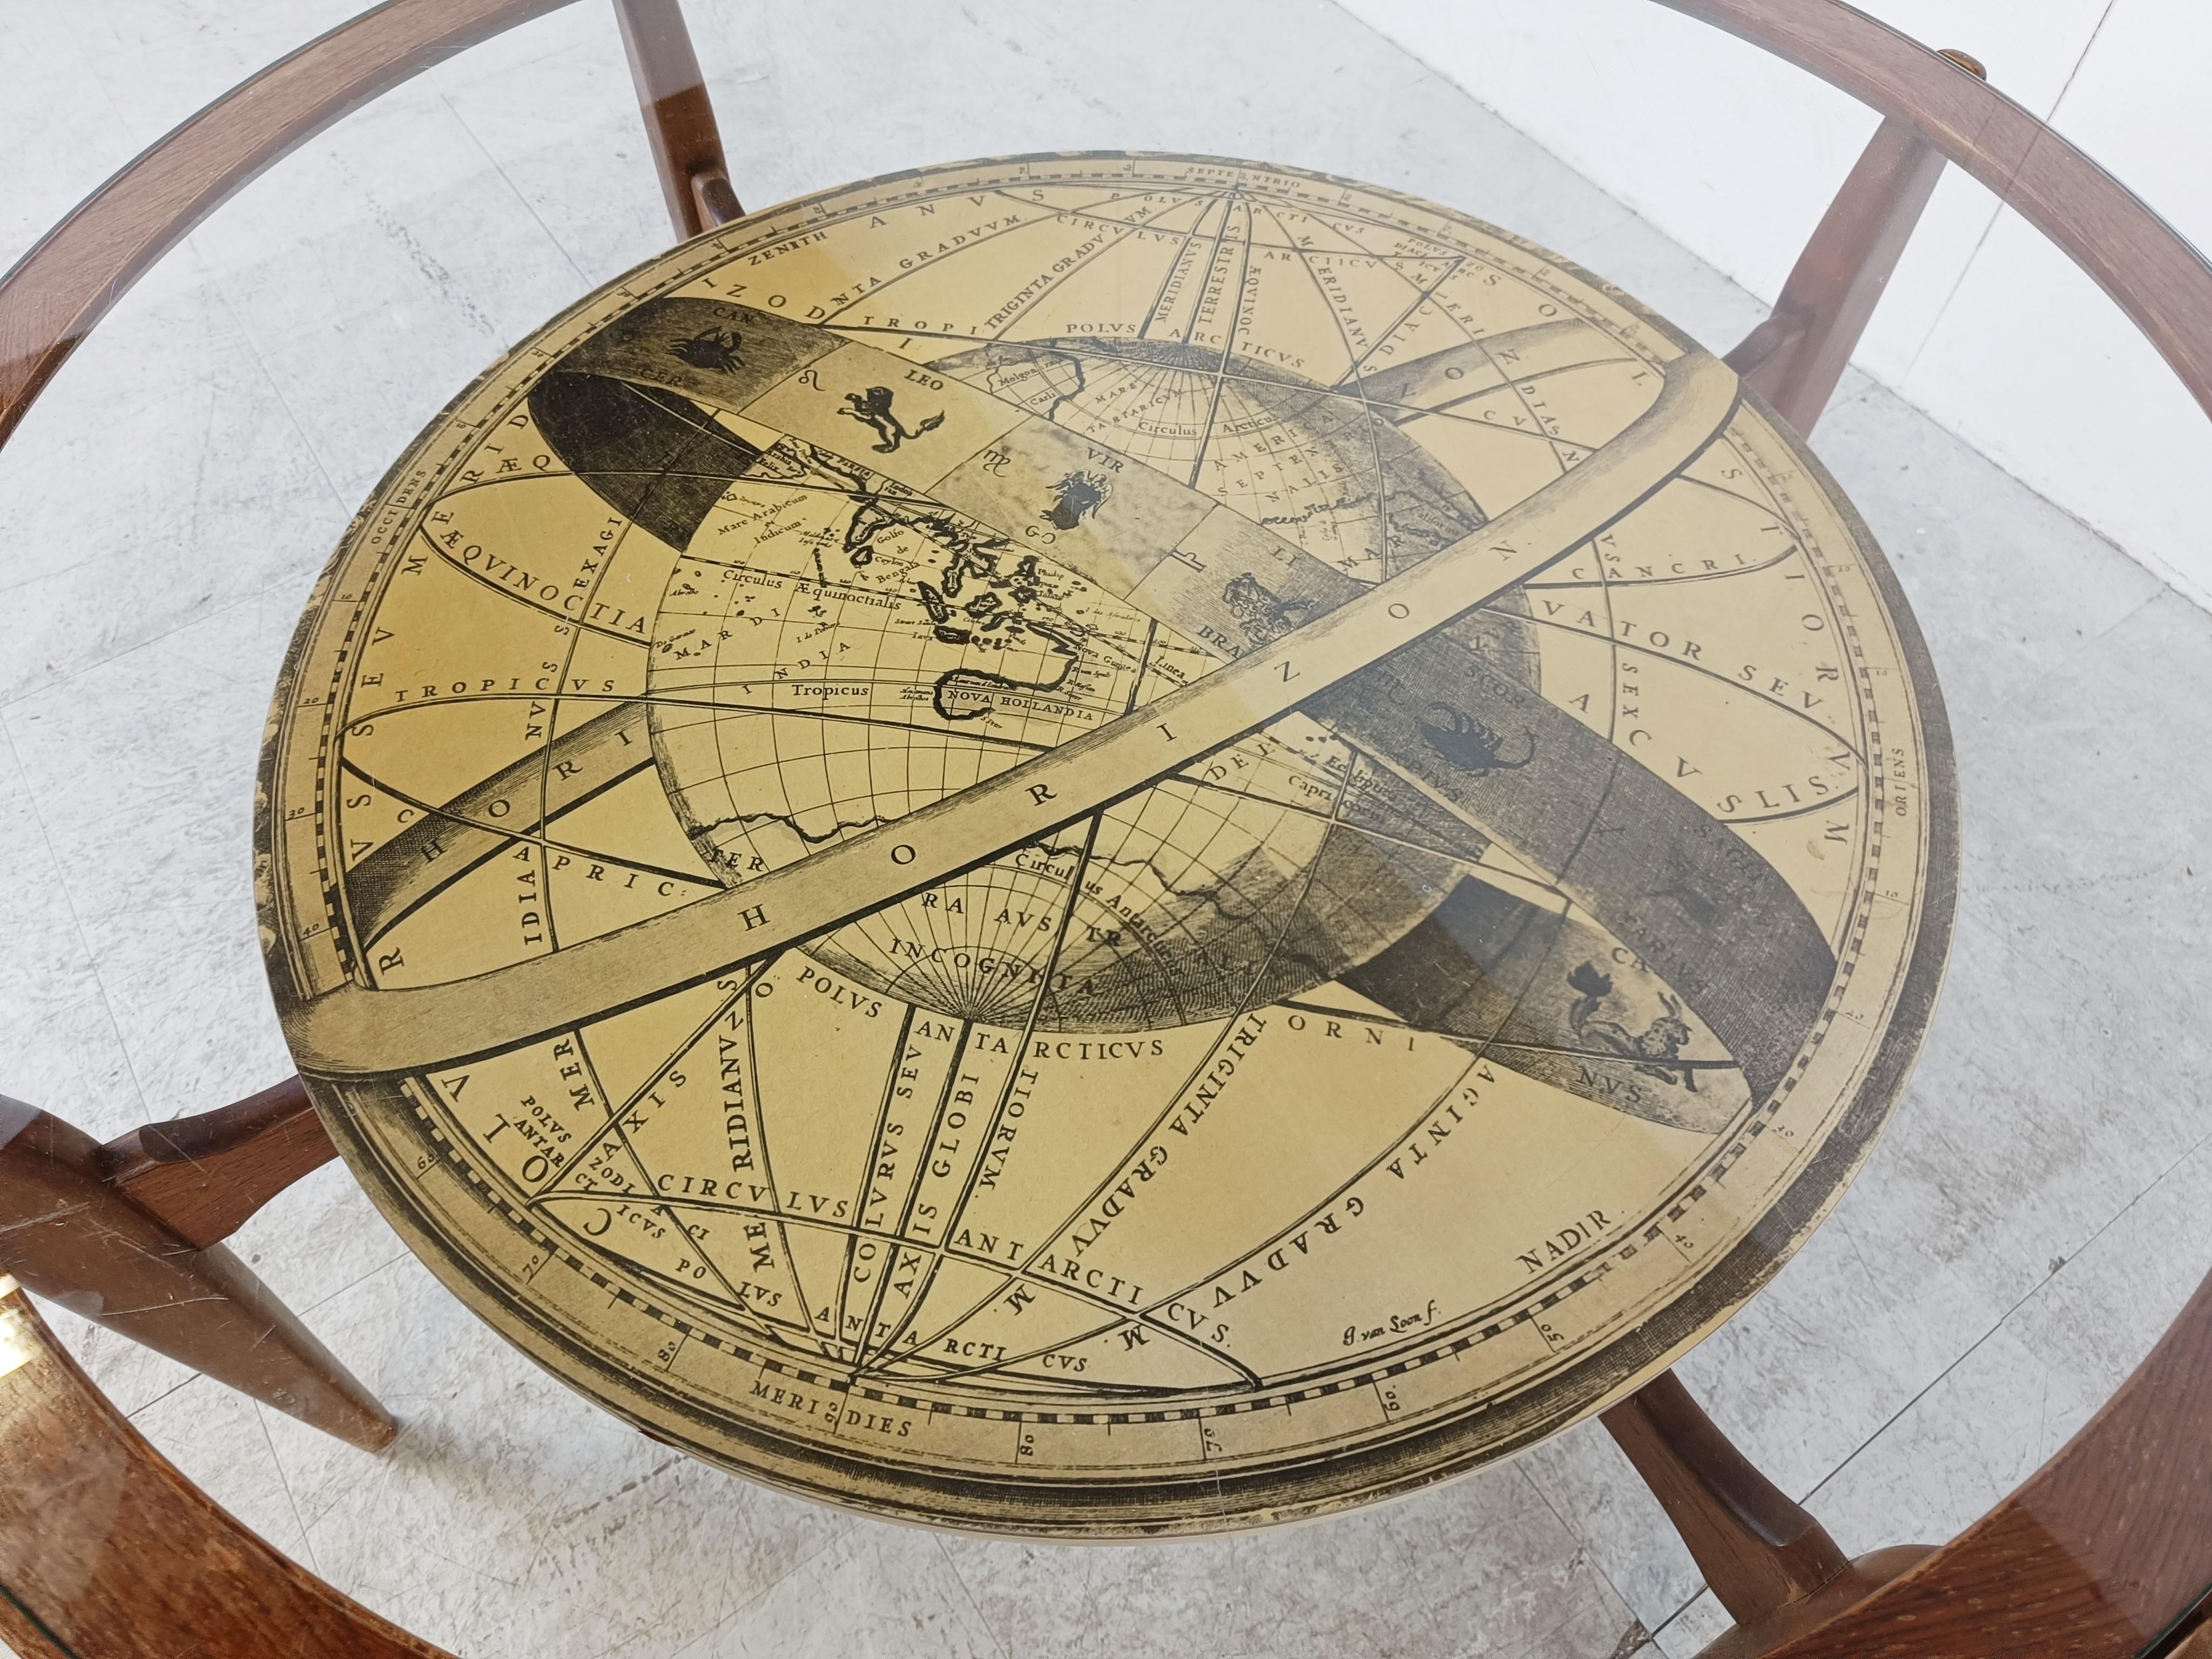 Mid century round coffee table consisting of a nicely crafted wooden frame, a clear glas top and a antique world map table top.

Very much in the style of Piero Fornasetti.

1950s - Italy

Good condition

Dimensions:
Widt: 105cm/41.33